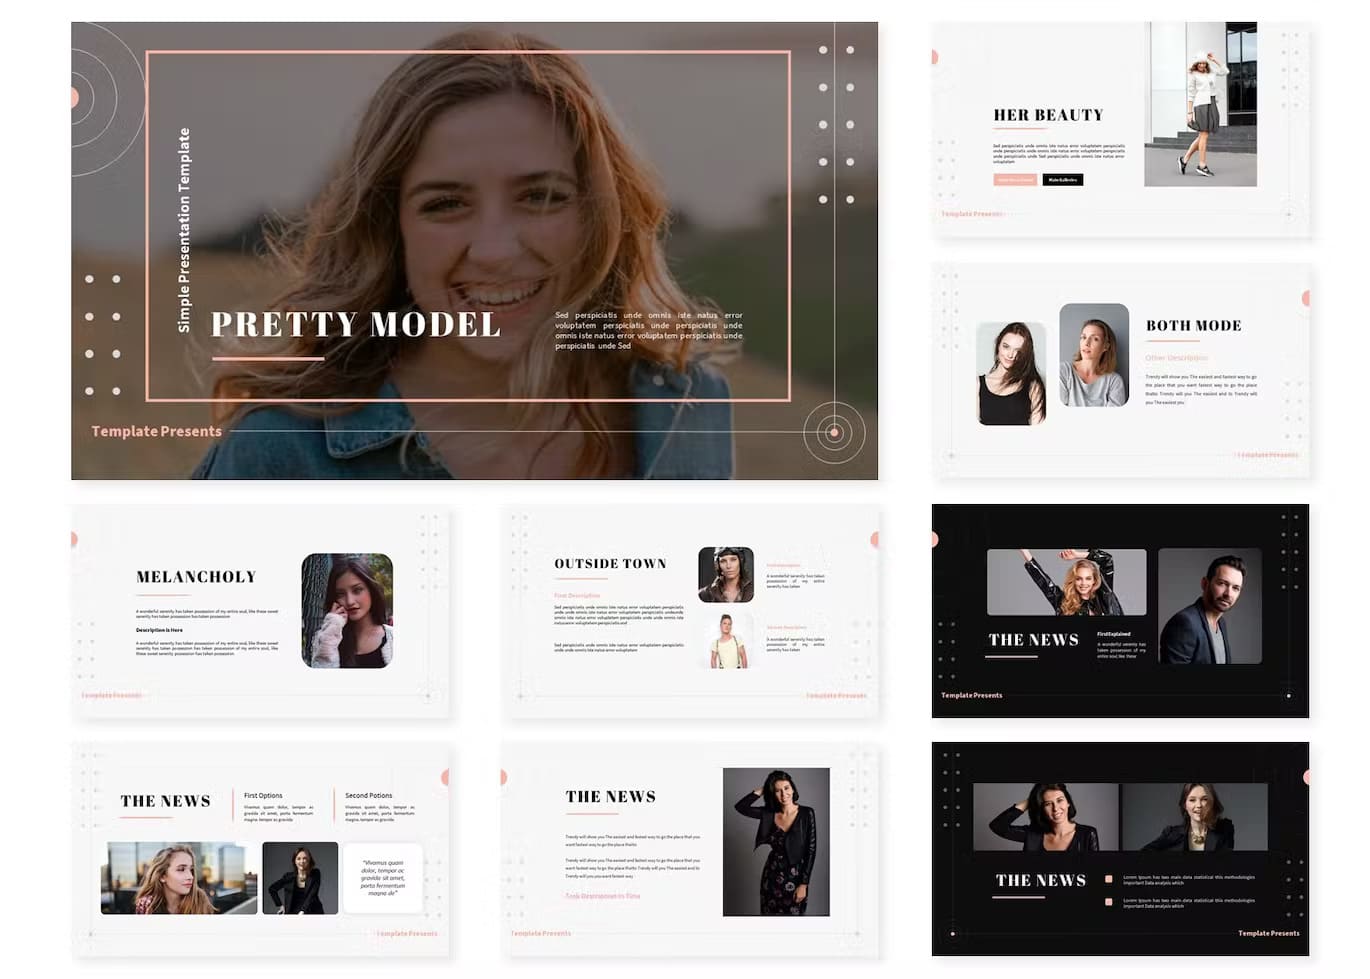 The news of the Pretty Model | Keynote Template.